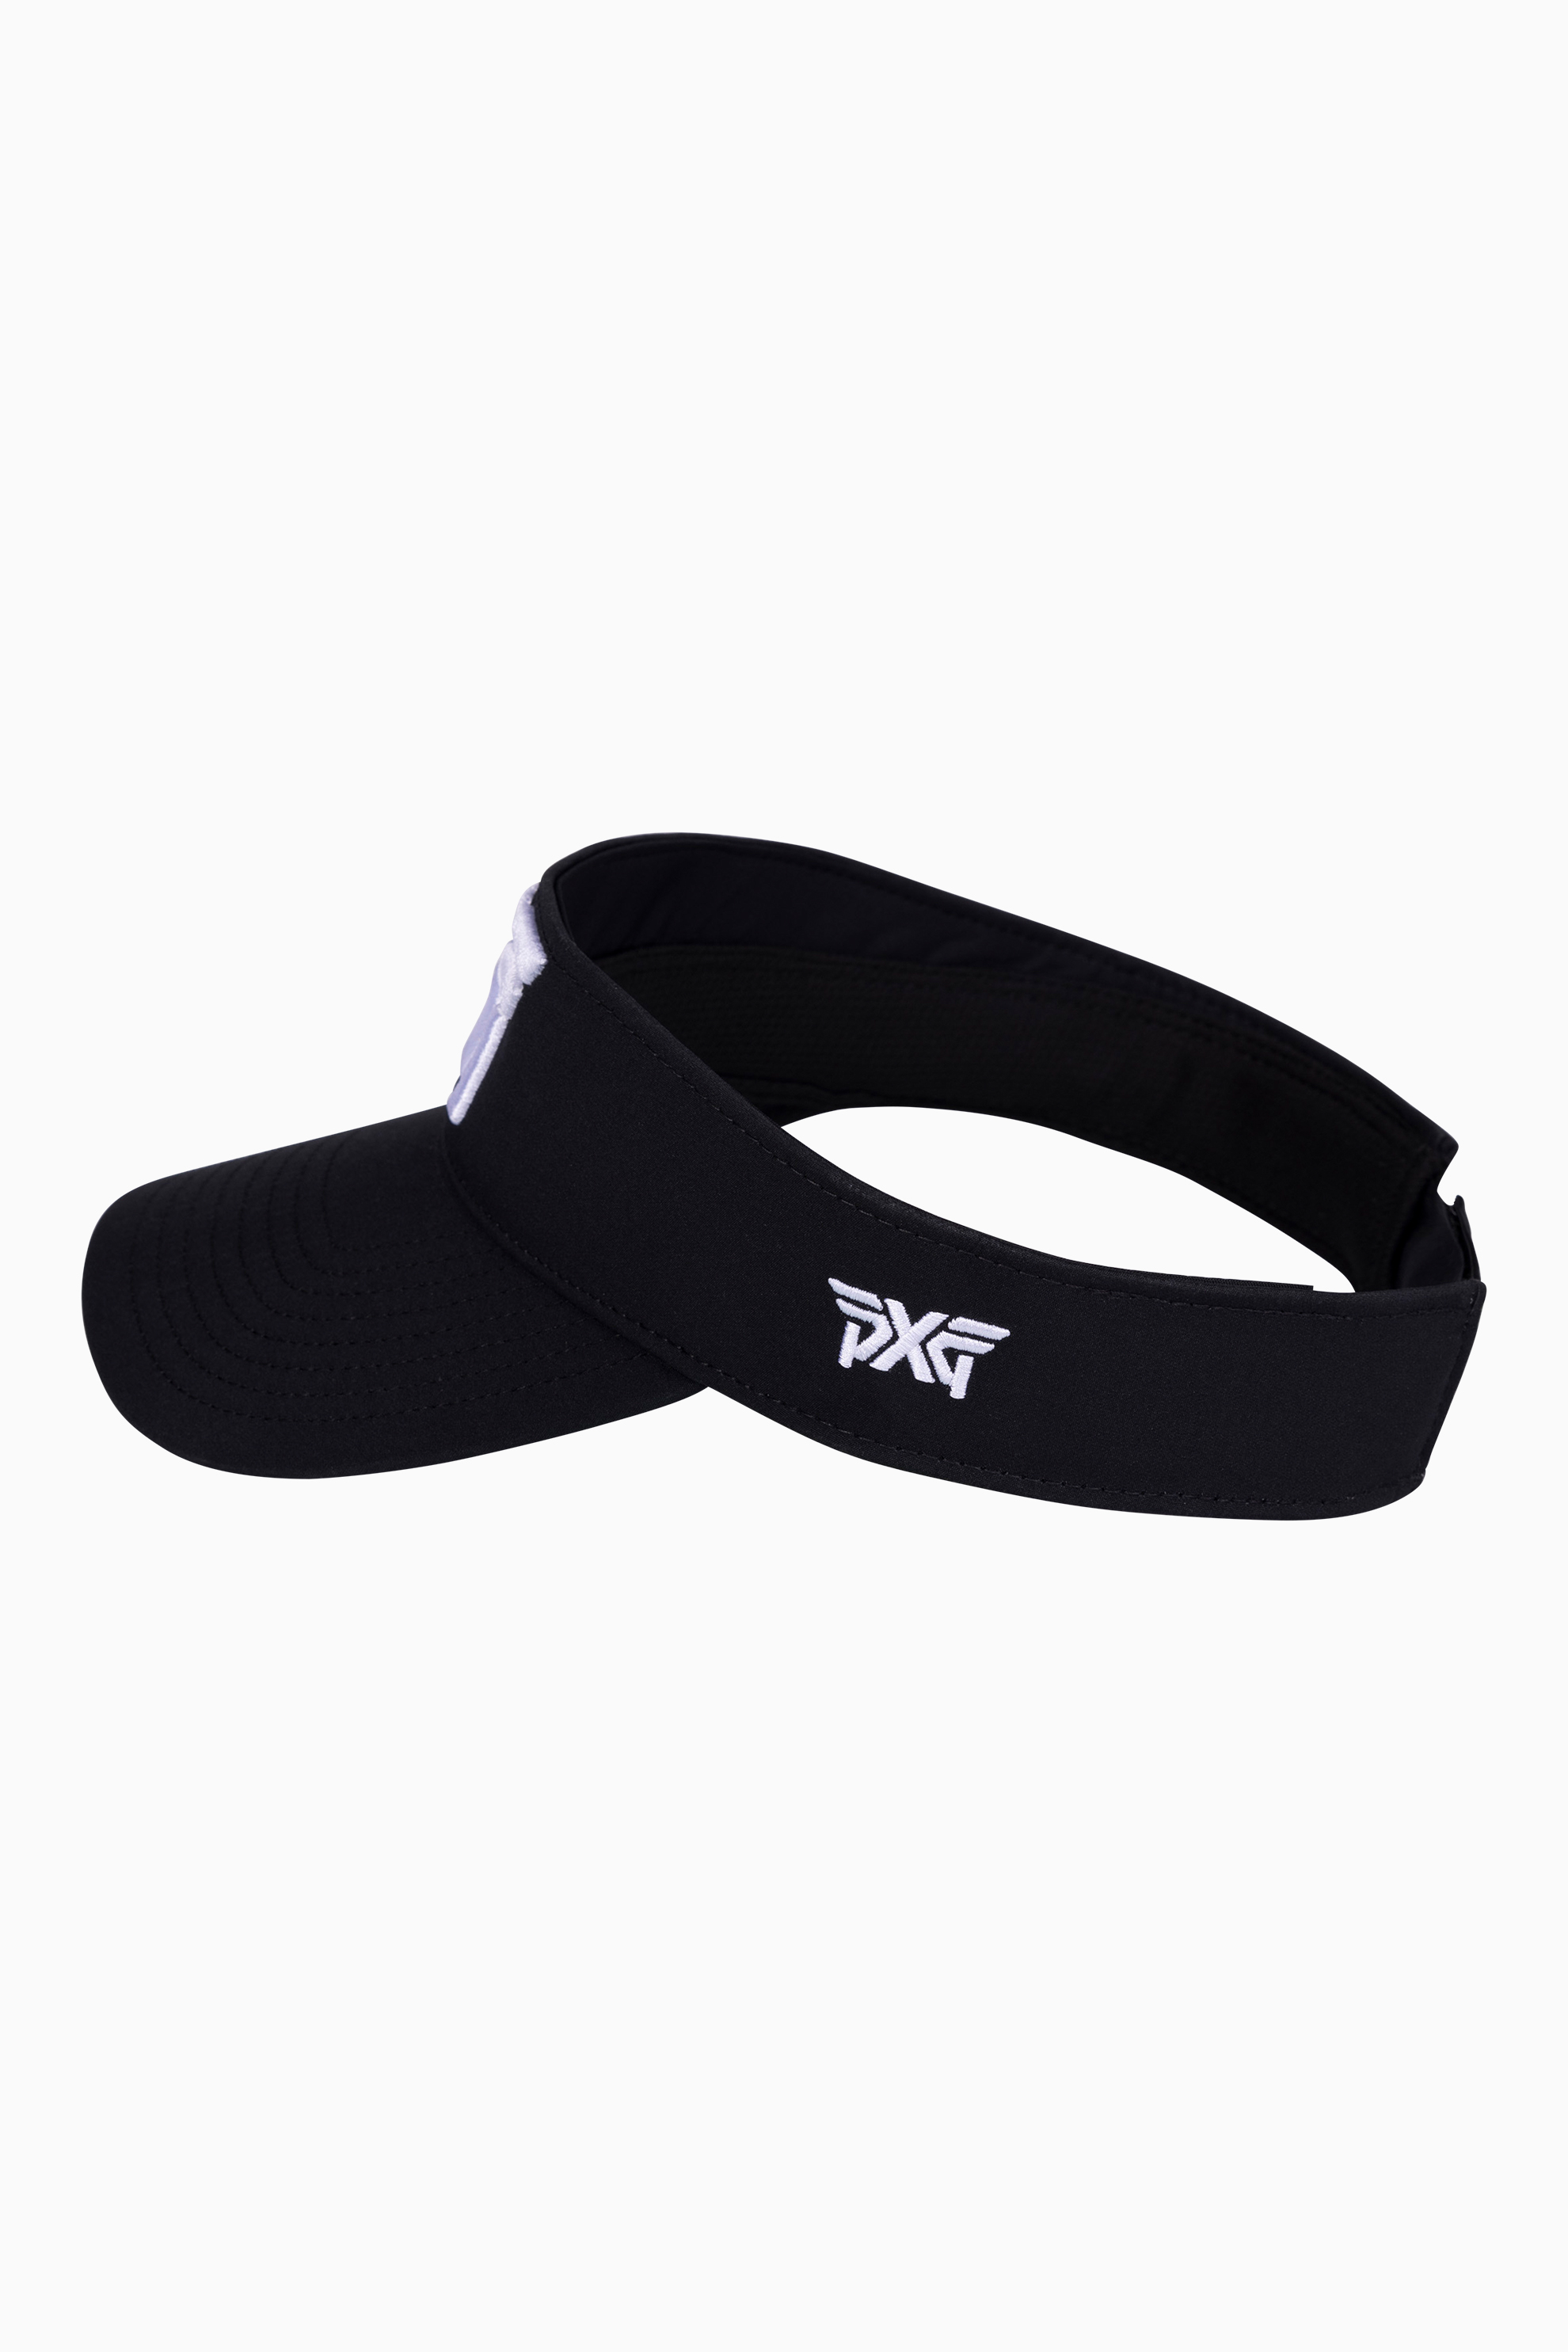 Sport Visor | Shop the Highest Quality Golf Apparel, Gear, Accessories and  Golf Clubs at PXG